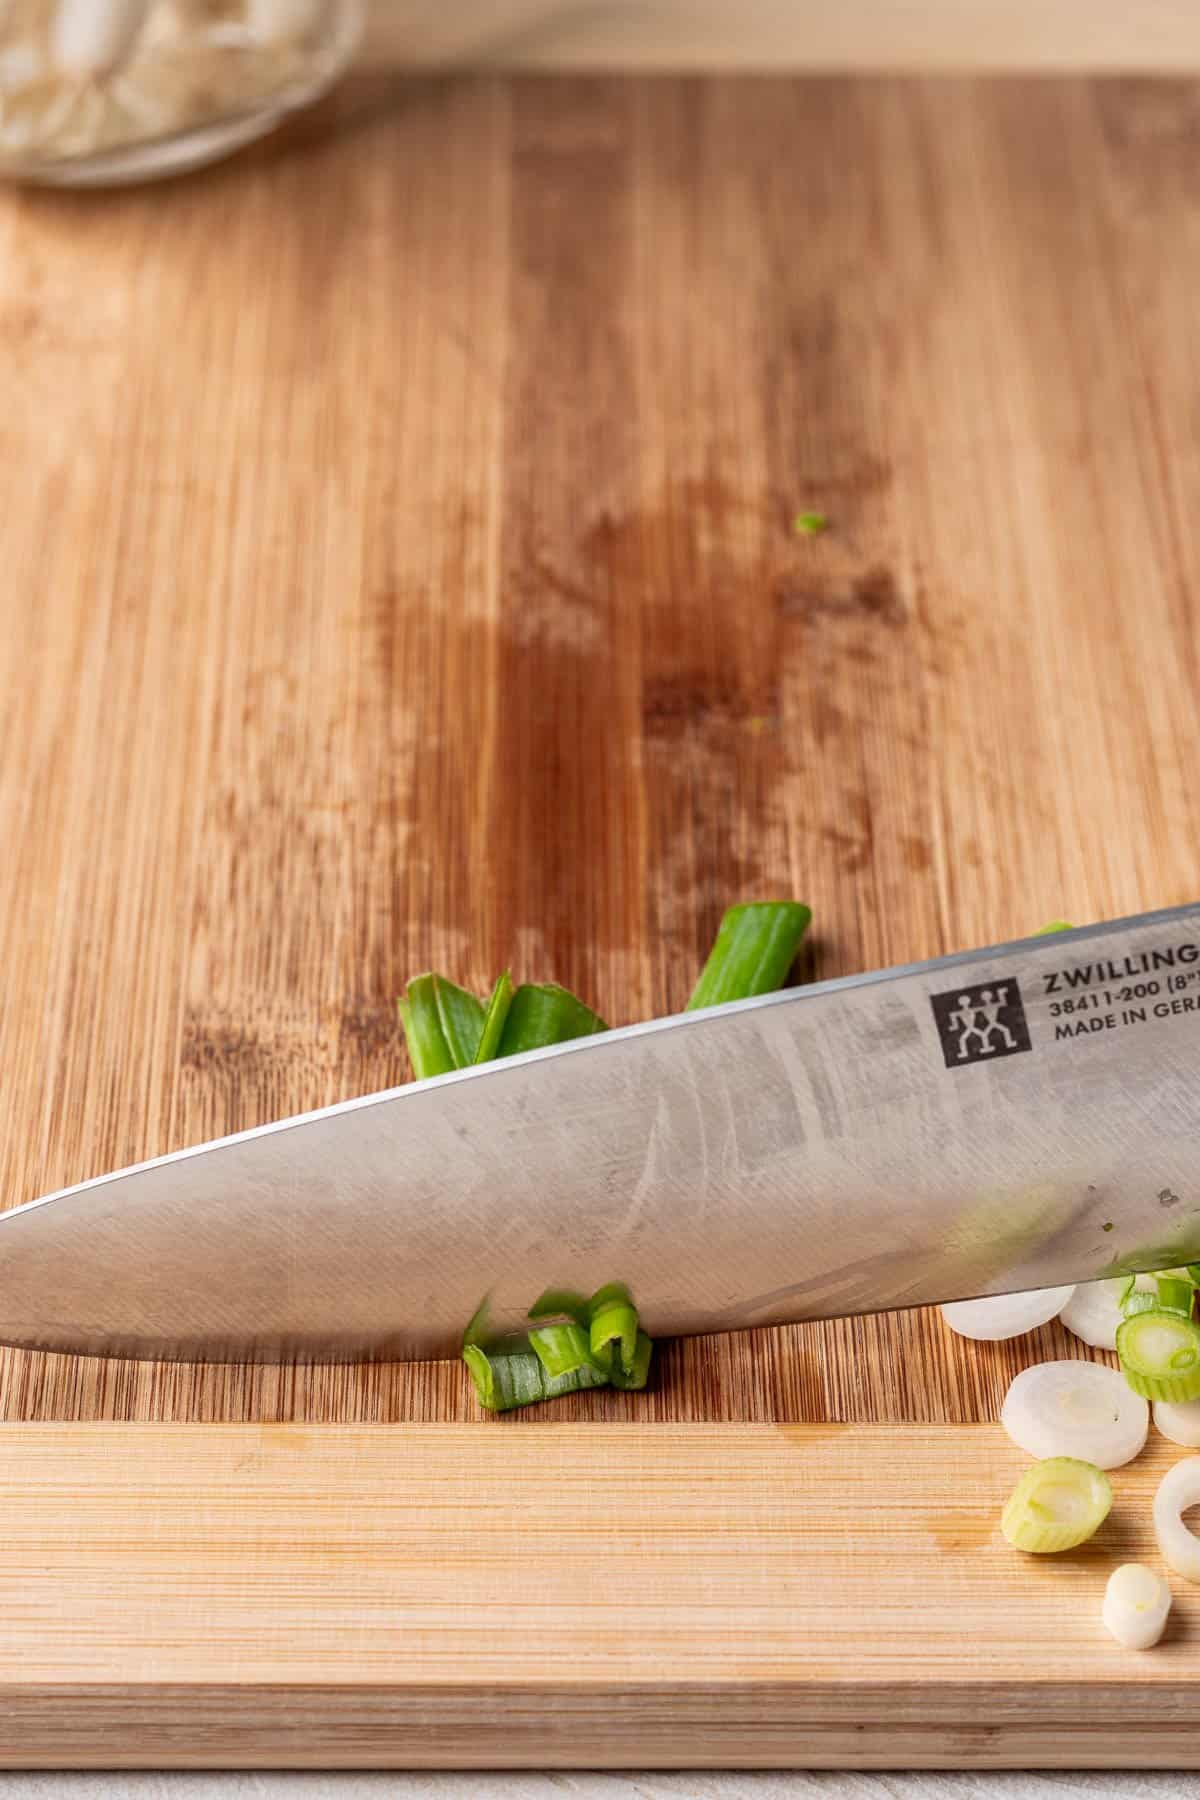 A knife slicing the green part of a green onion.